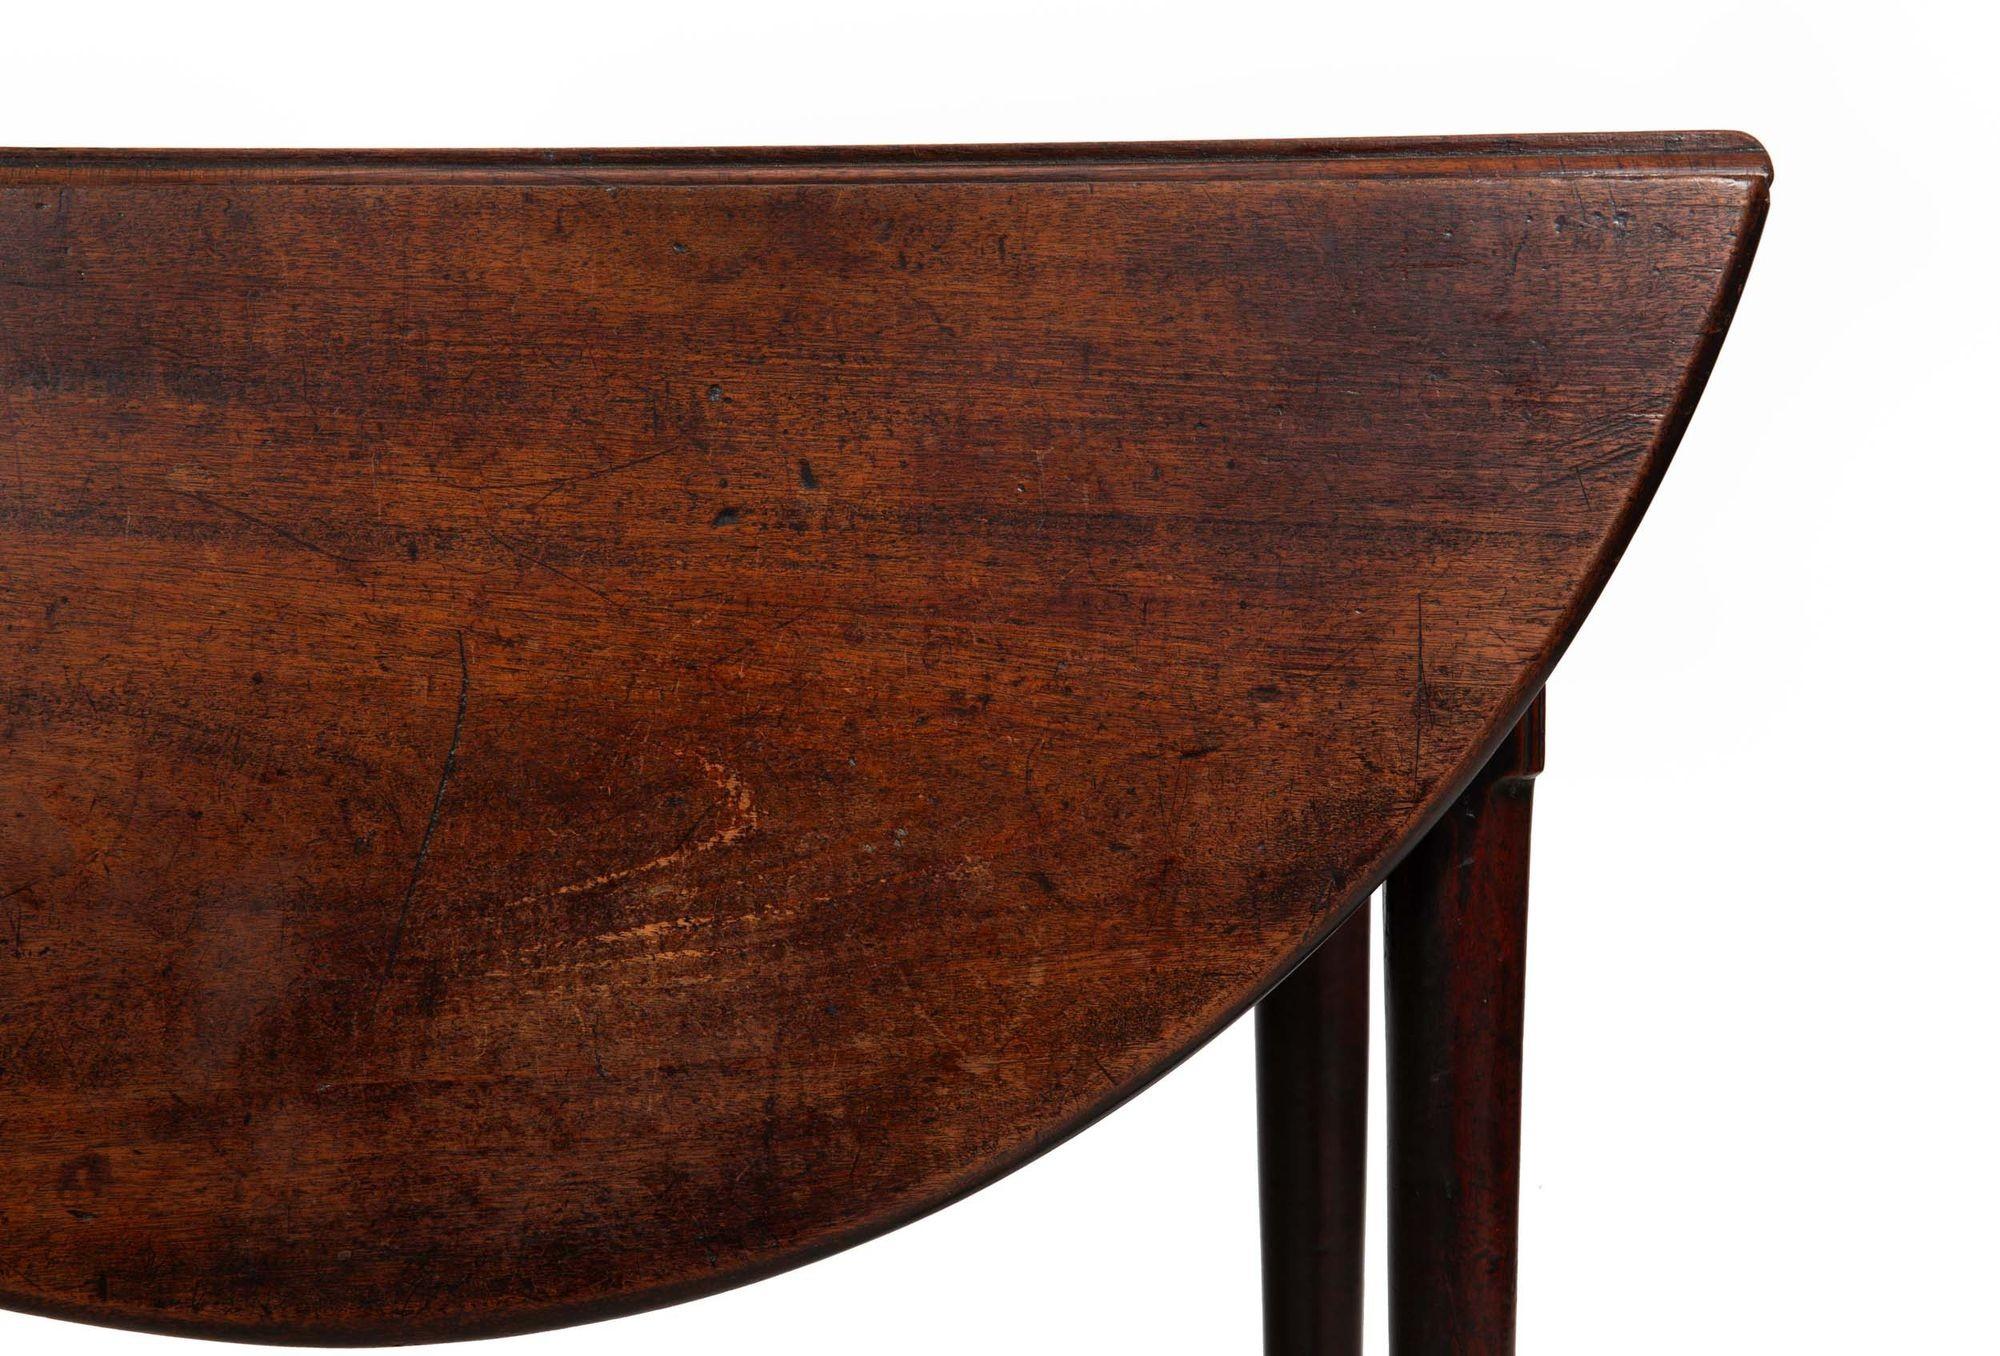 Small Beautifully Patinated George II English Antique Drop-Leaf Table ca. 1750 For Sale 10